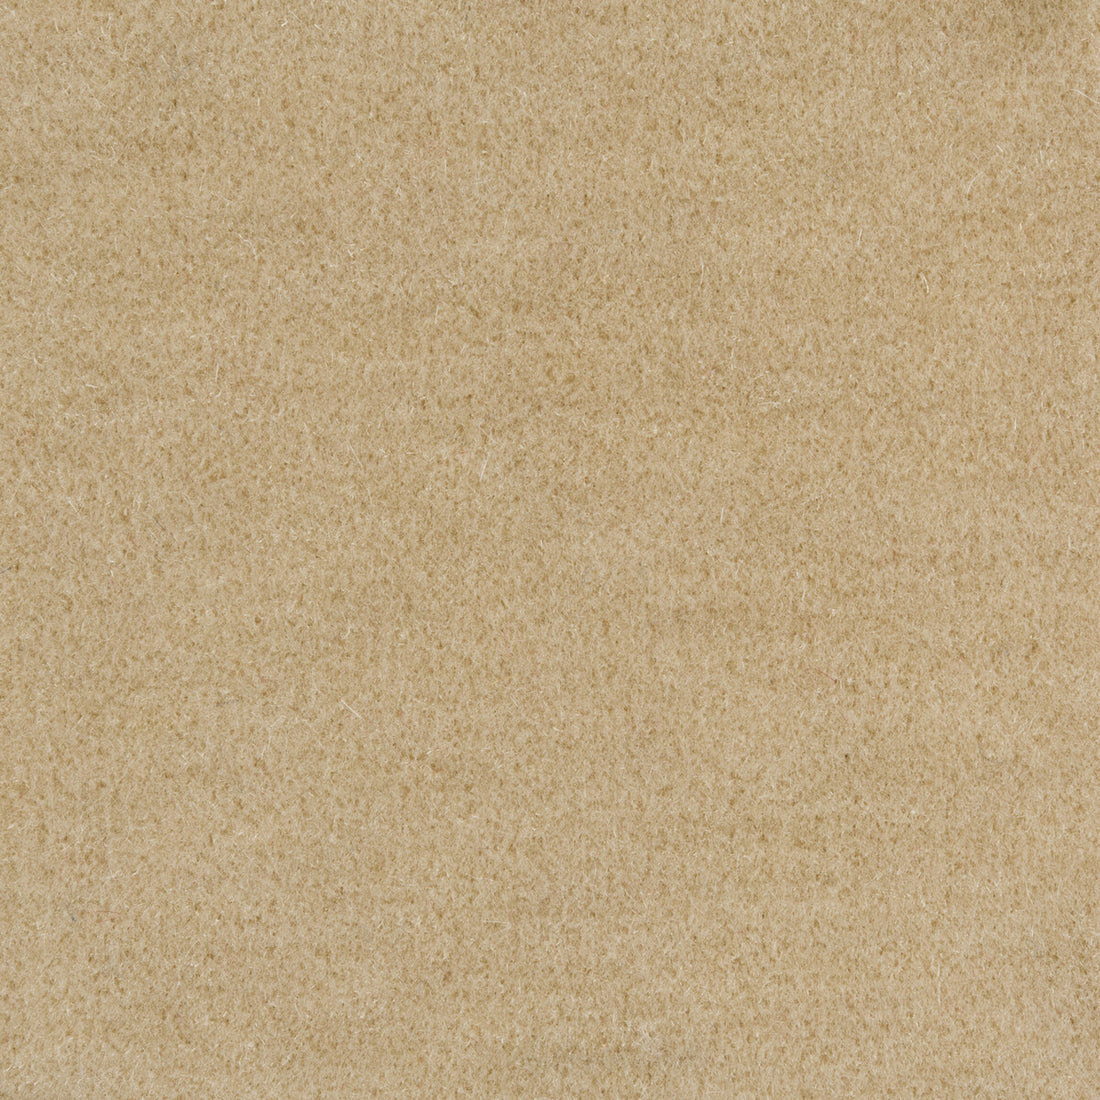 Bachelor Mohair fabric in oatmeal color - pattern 8014101.111.0 - by Brunschwig &amp; Fils